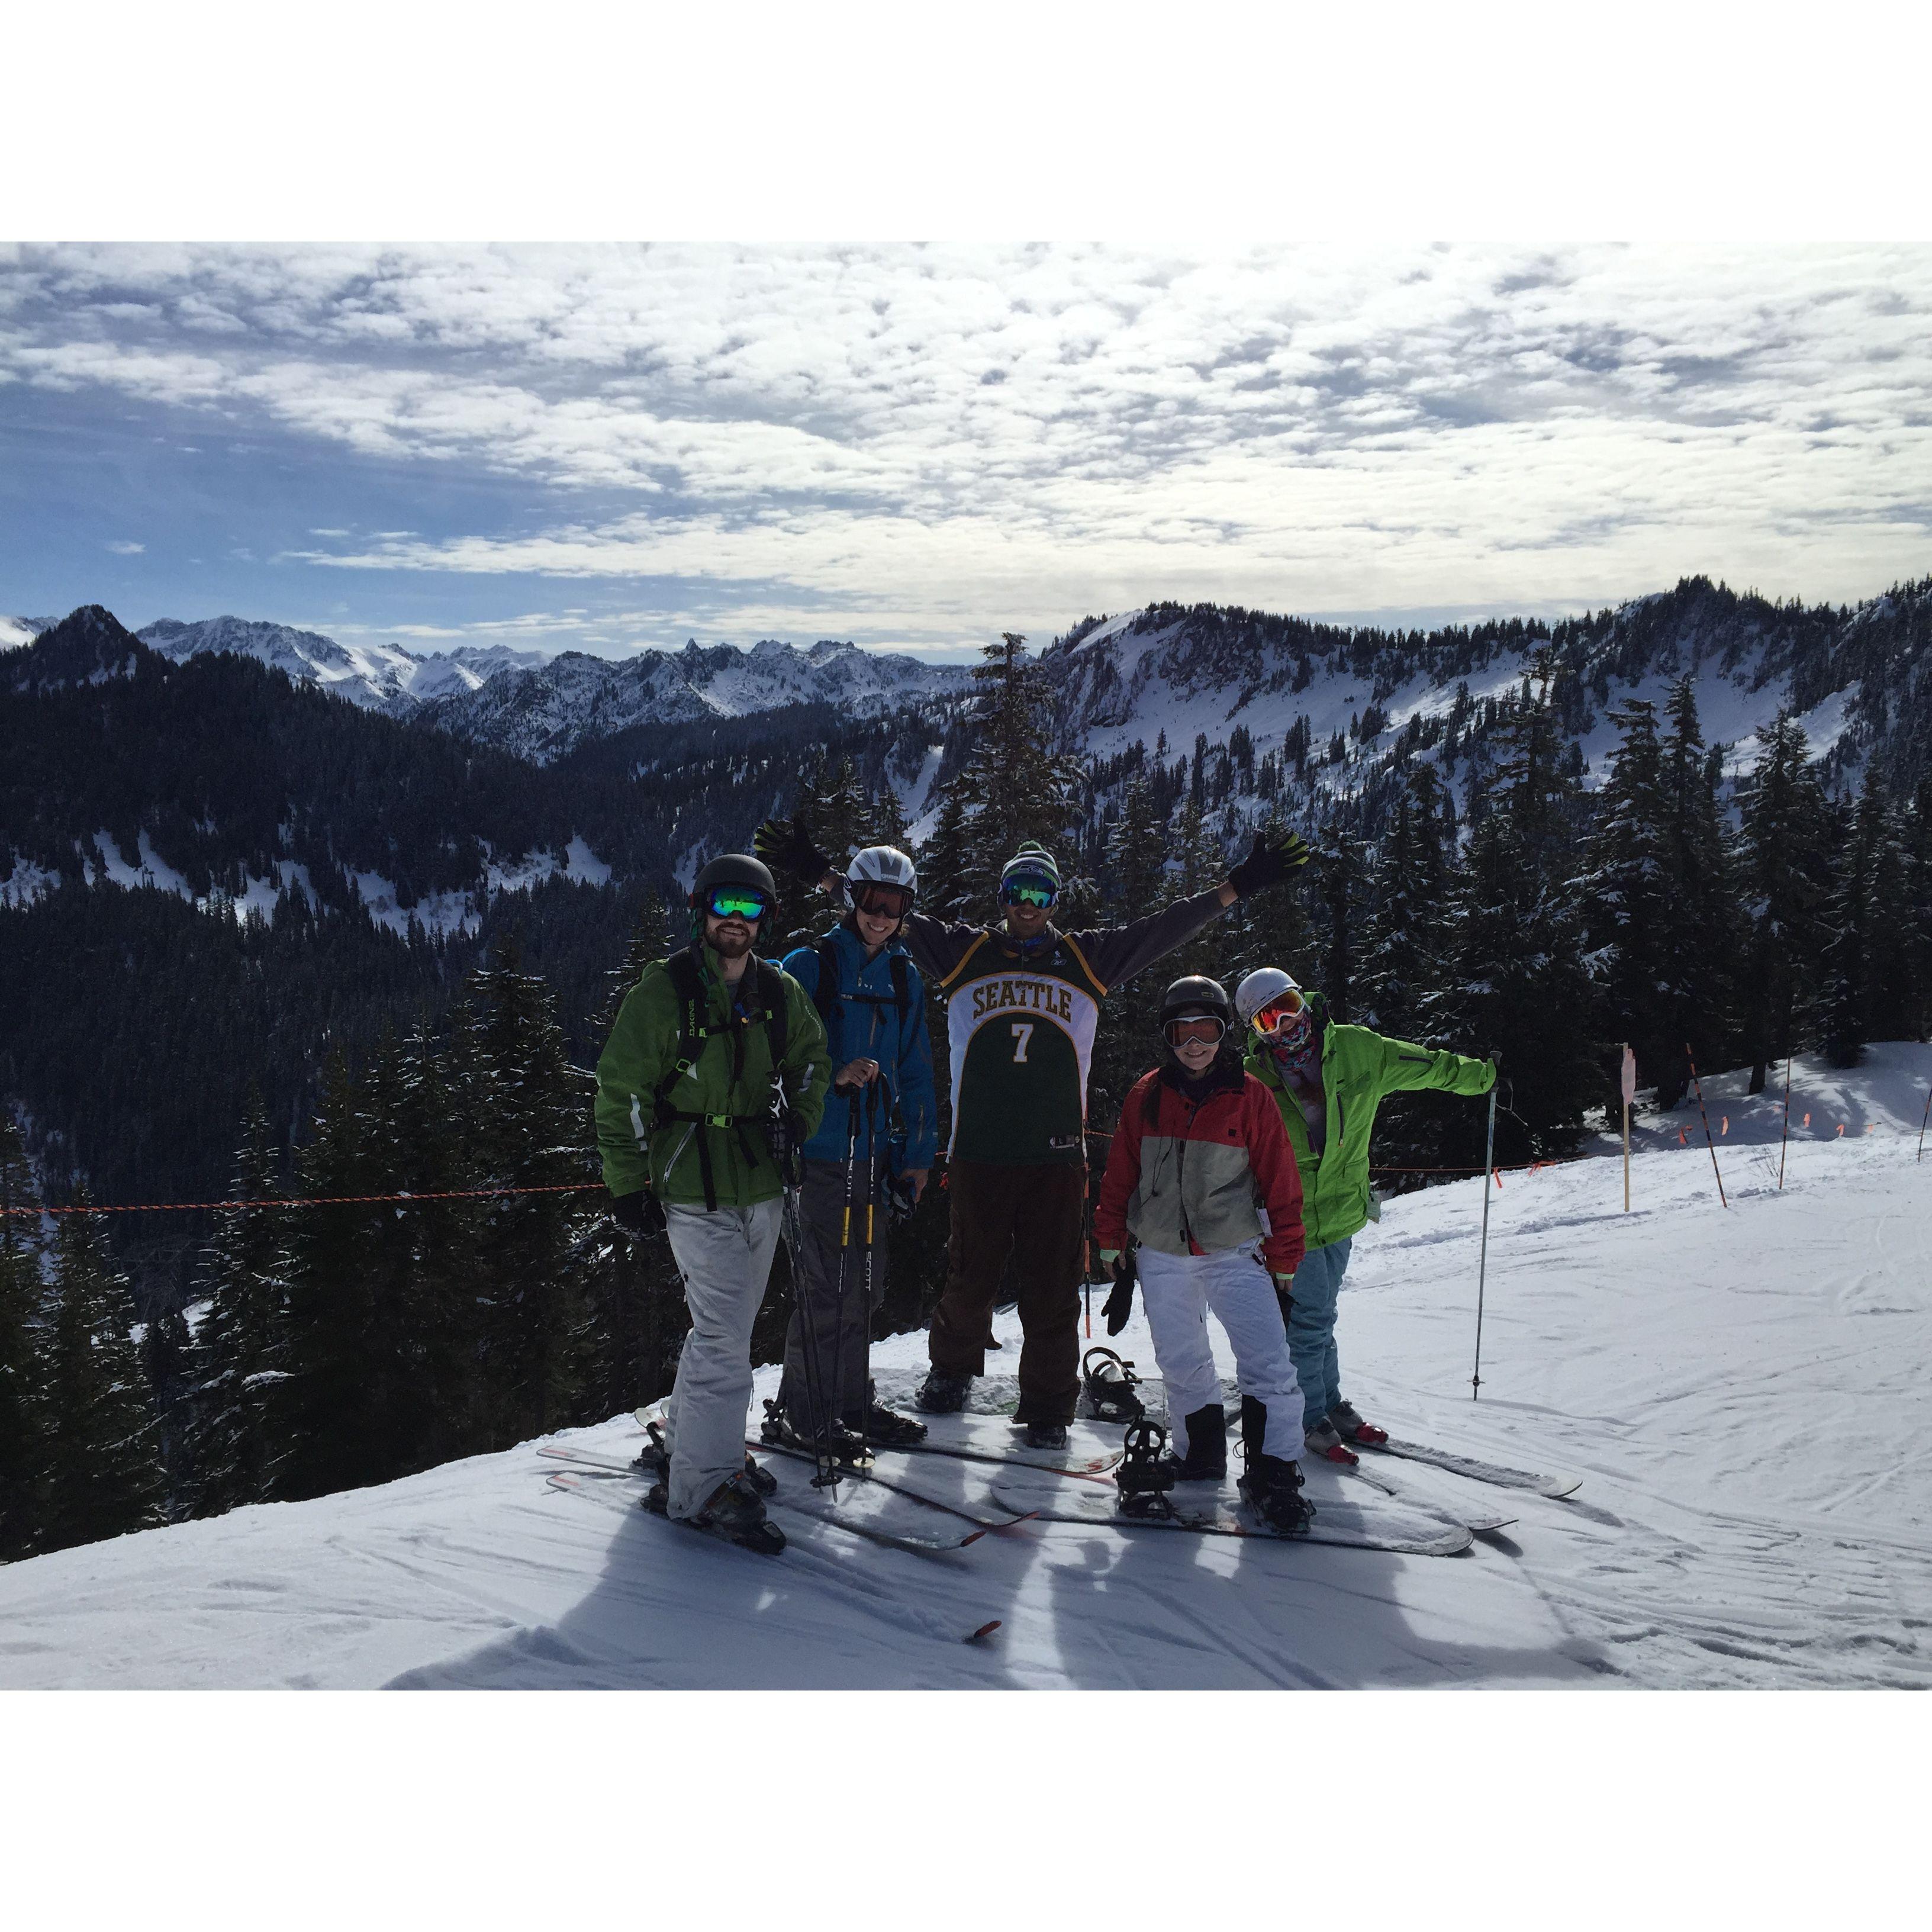 A day skiing in 2015 with our friends Ankar, Will, & Breinn